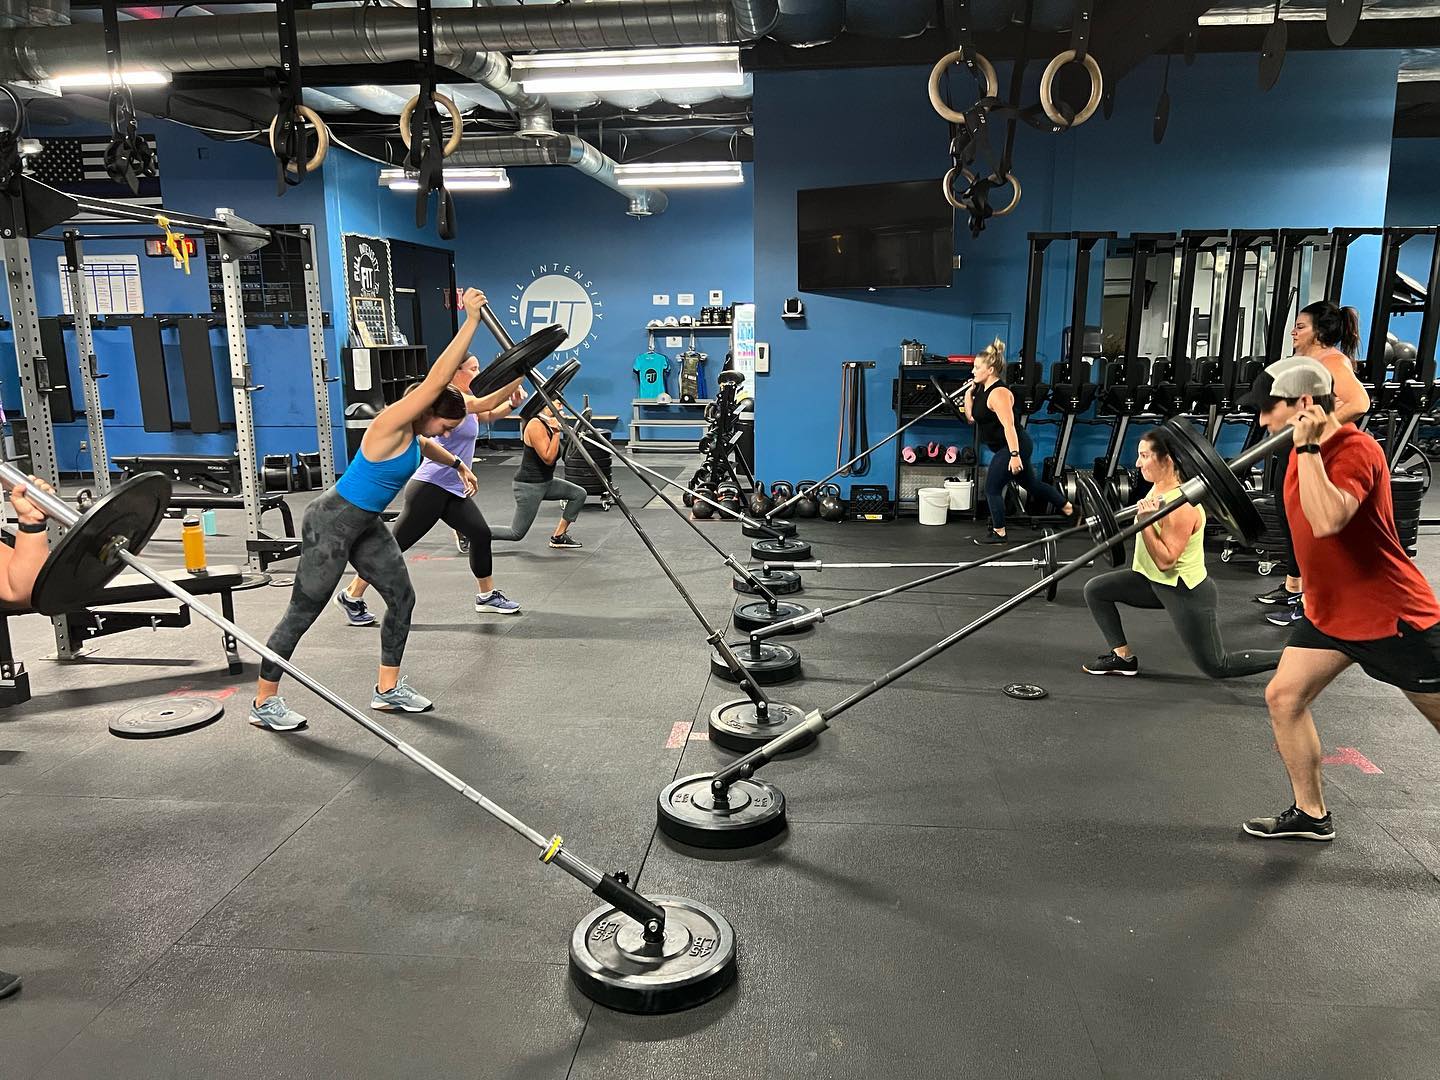 Group training fitness programs at FIT Brea